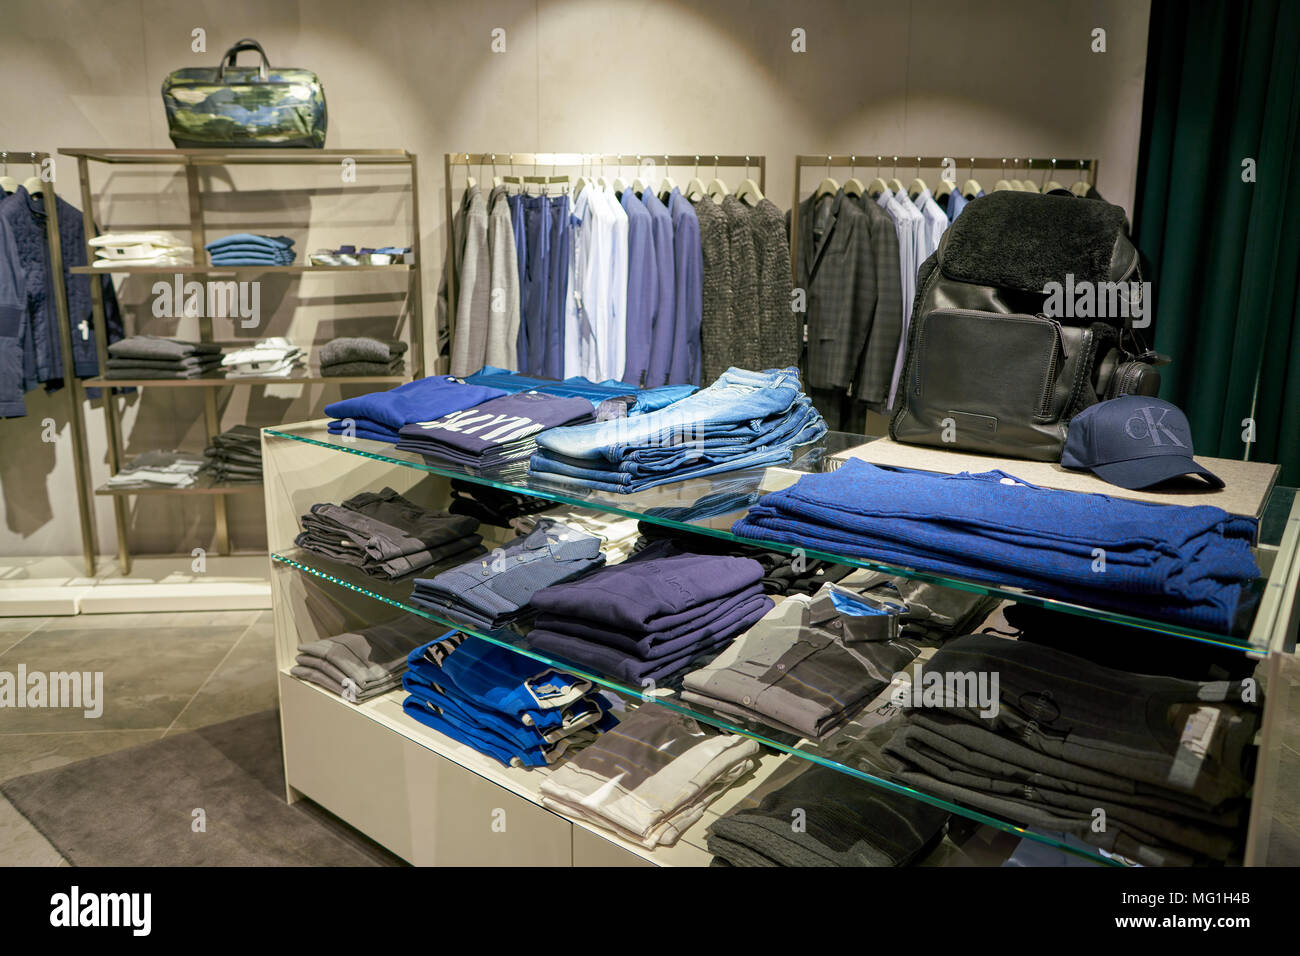 ROME, ITALY - CIRCA NOVEMBER, 2017: Calvin Klein clothing on display at a  second flagship store of Rinascente in Rome Stock Photo - Alamy